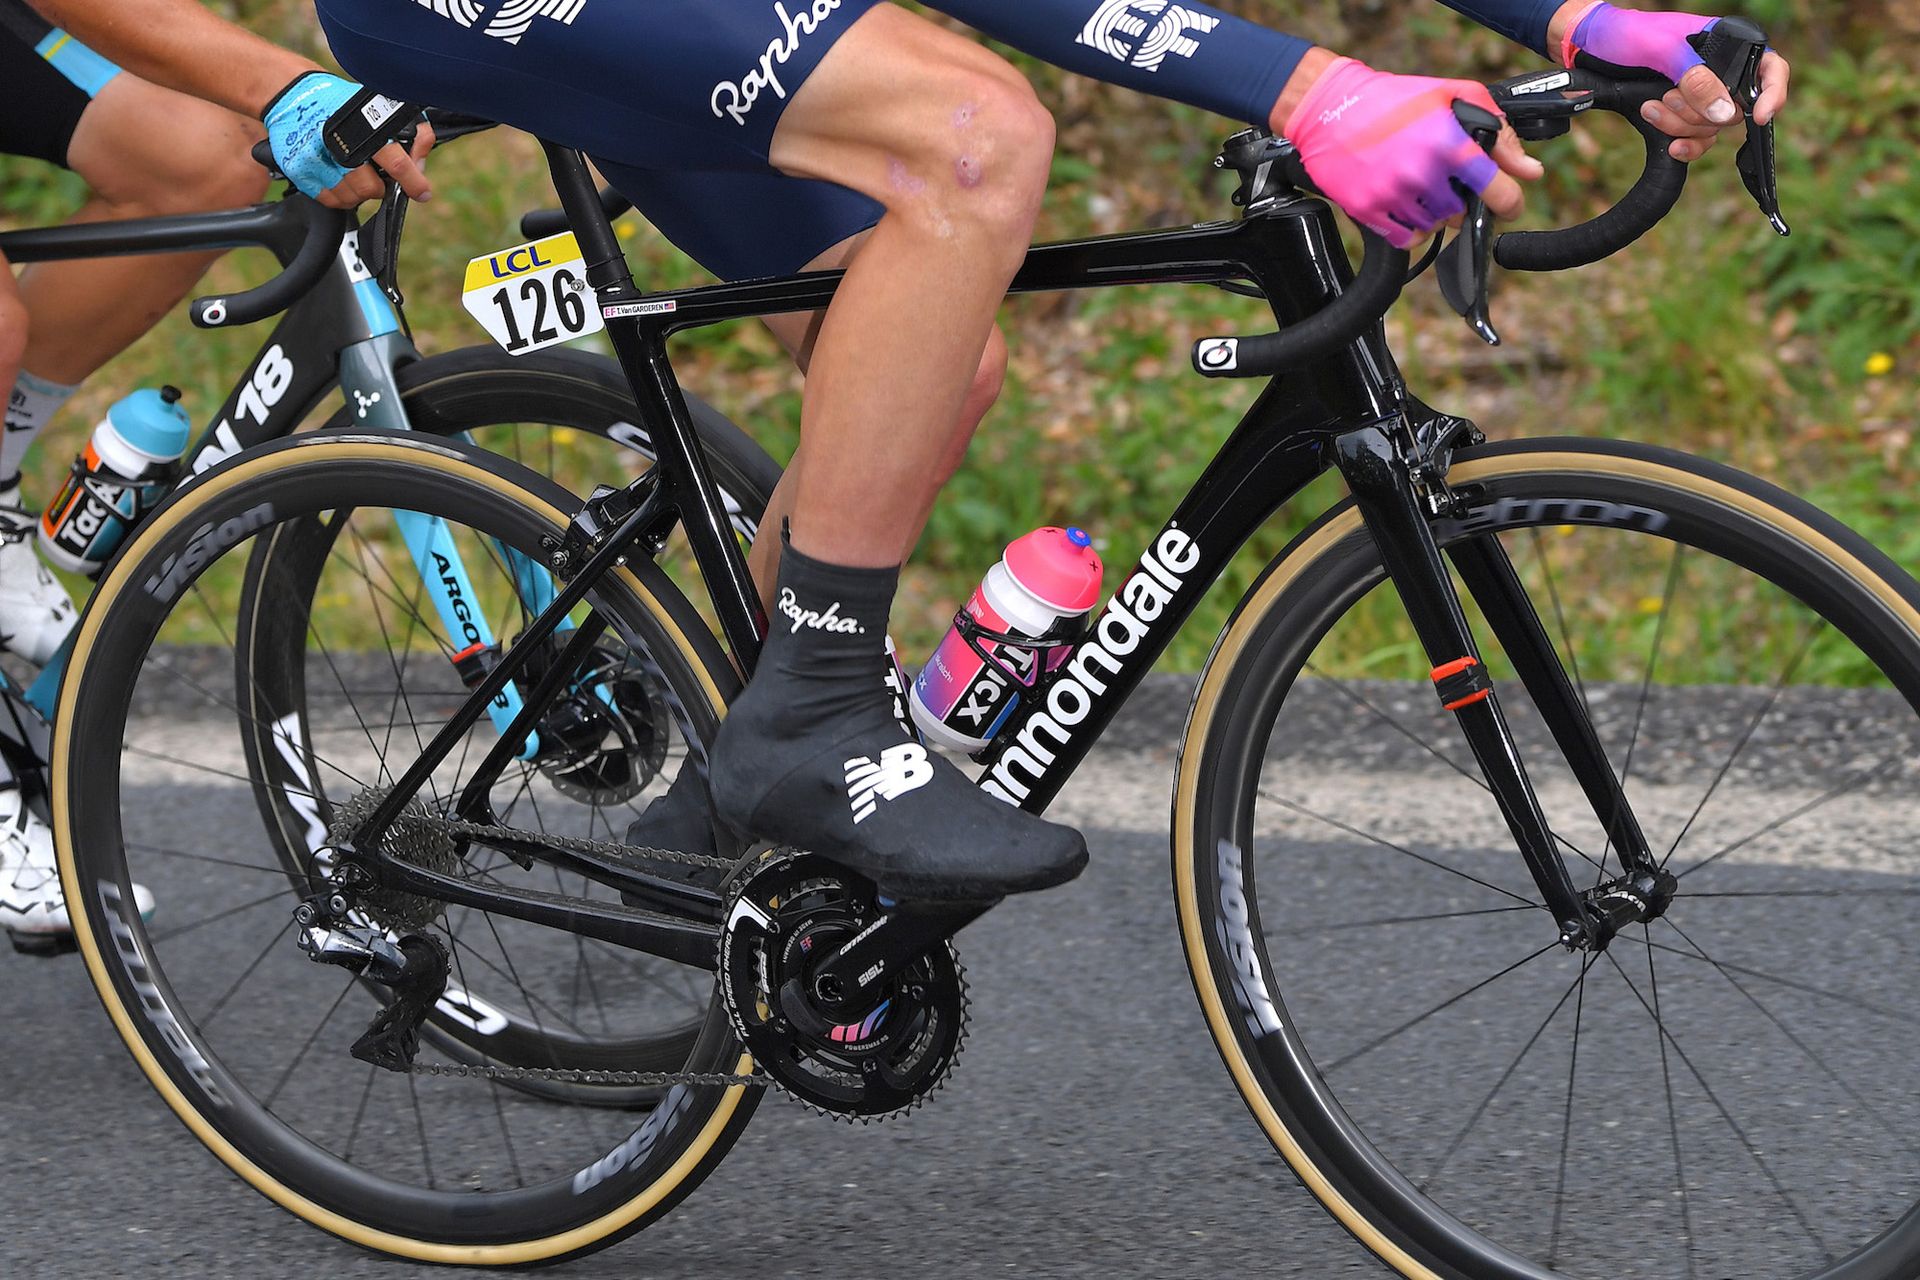 New bike from Cannondale spotted at the Critérium du Dauphiné | Cycling ...